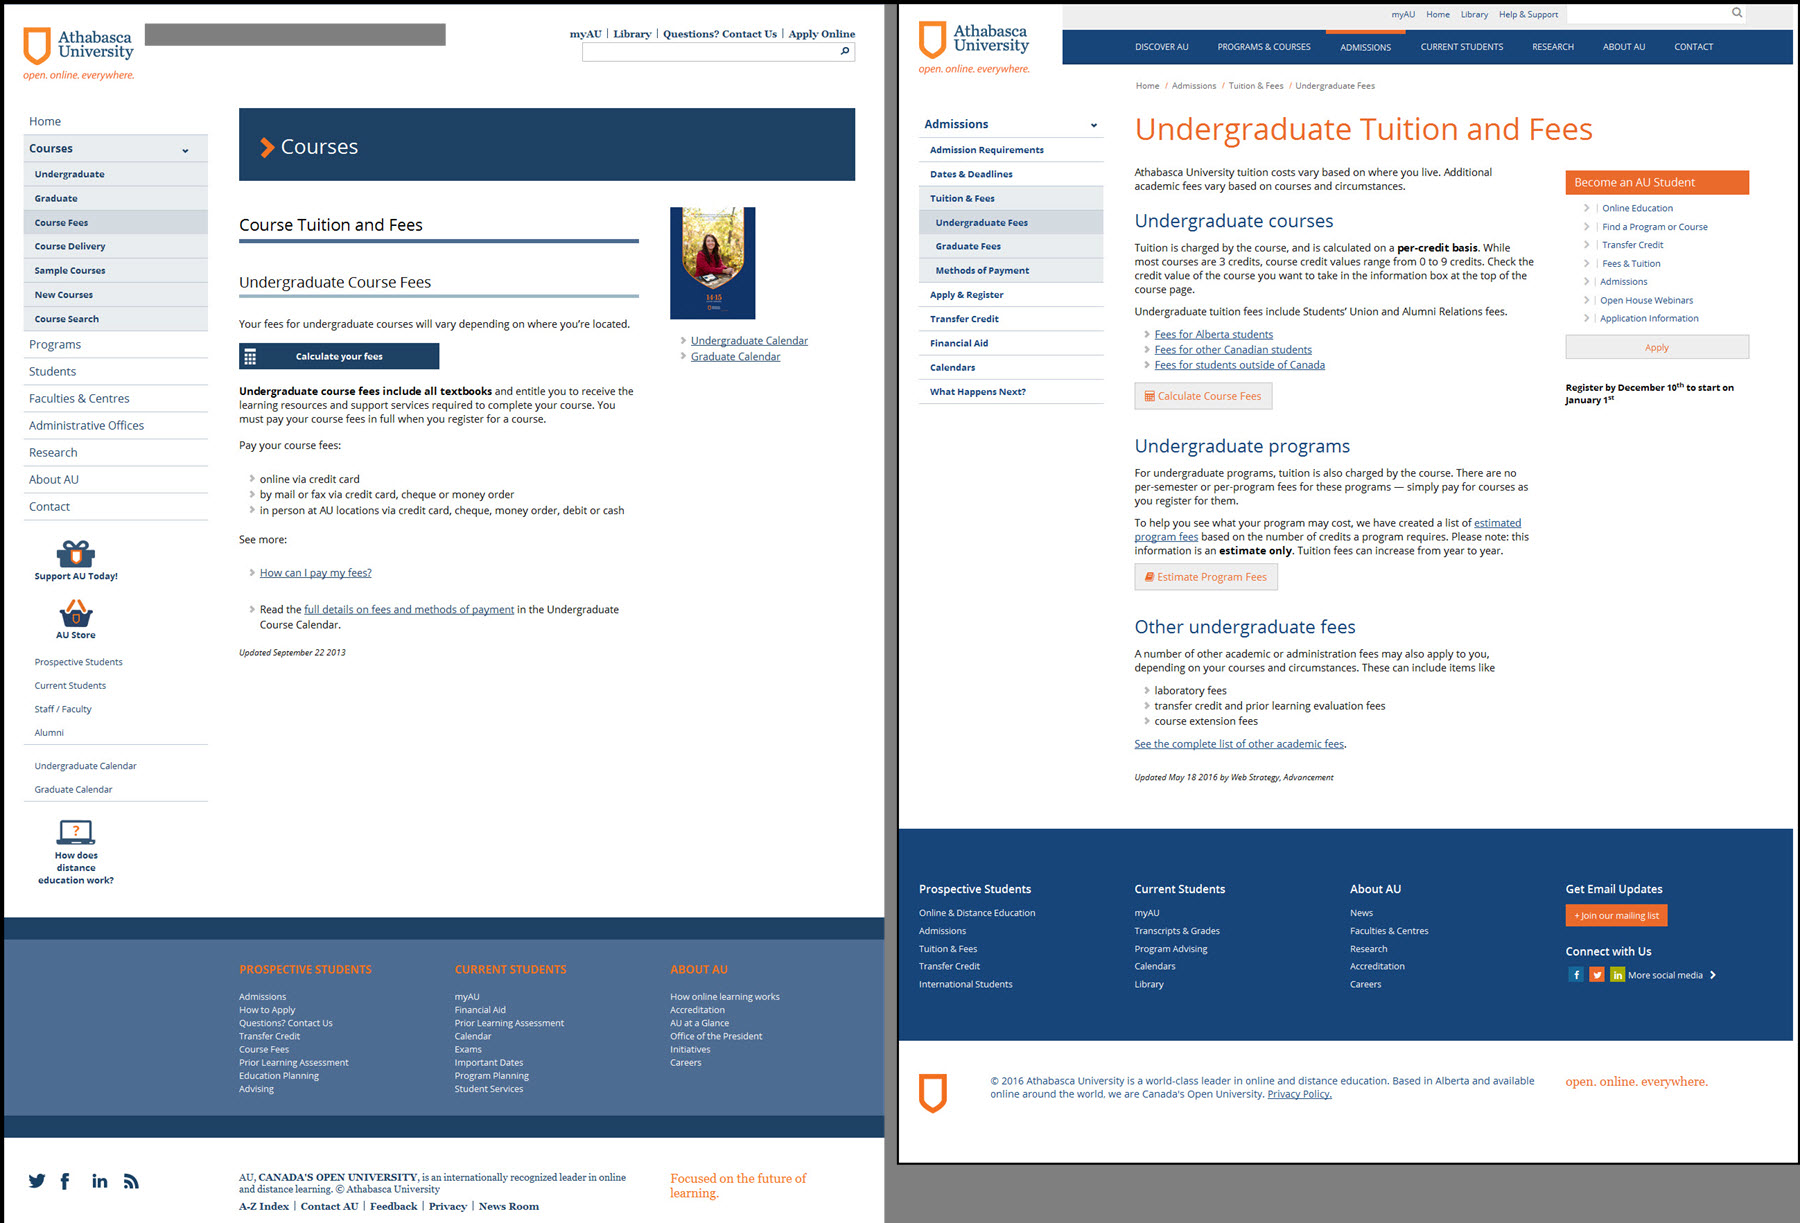 Comparison of original and revised versions of Athabasca University's undergraduate fees page